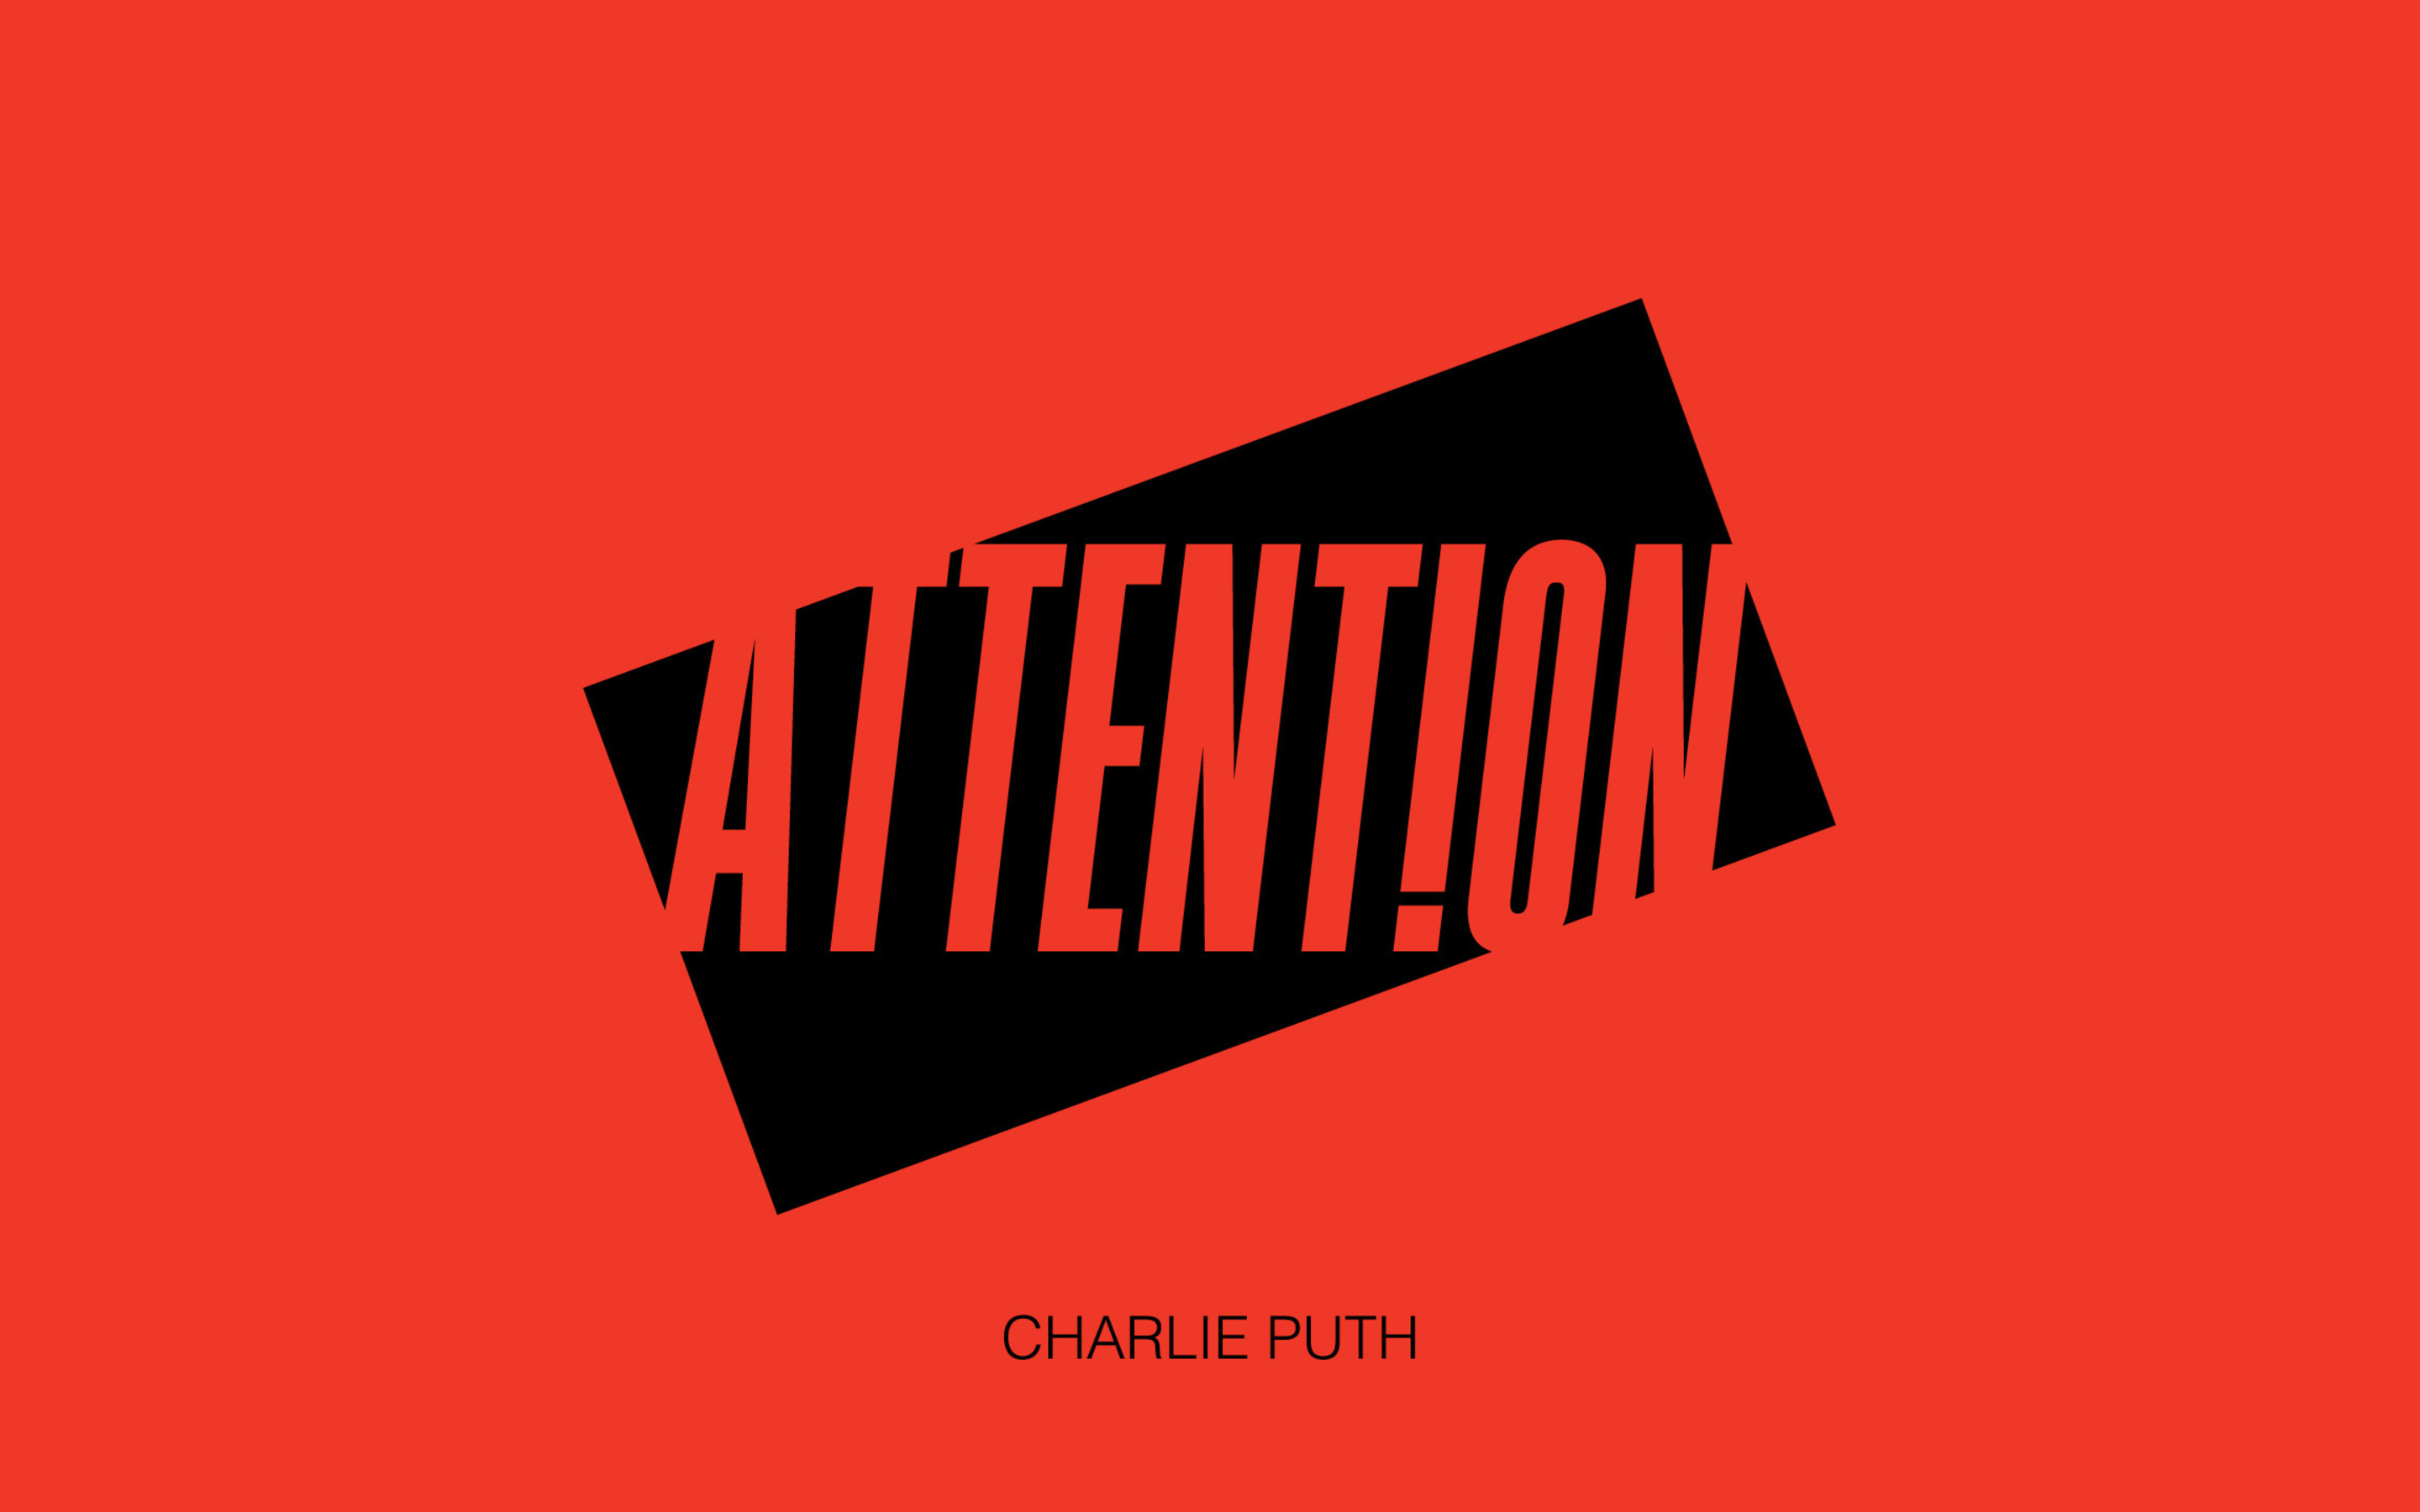 Puth attention текст